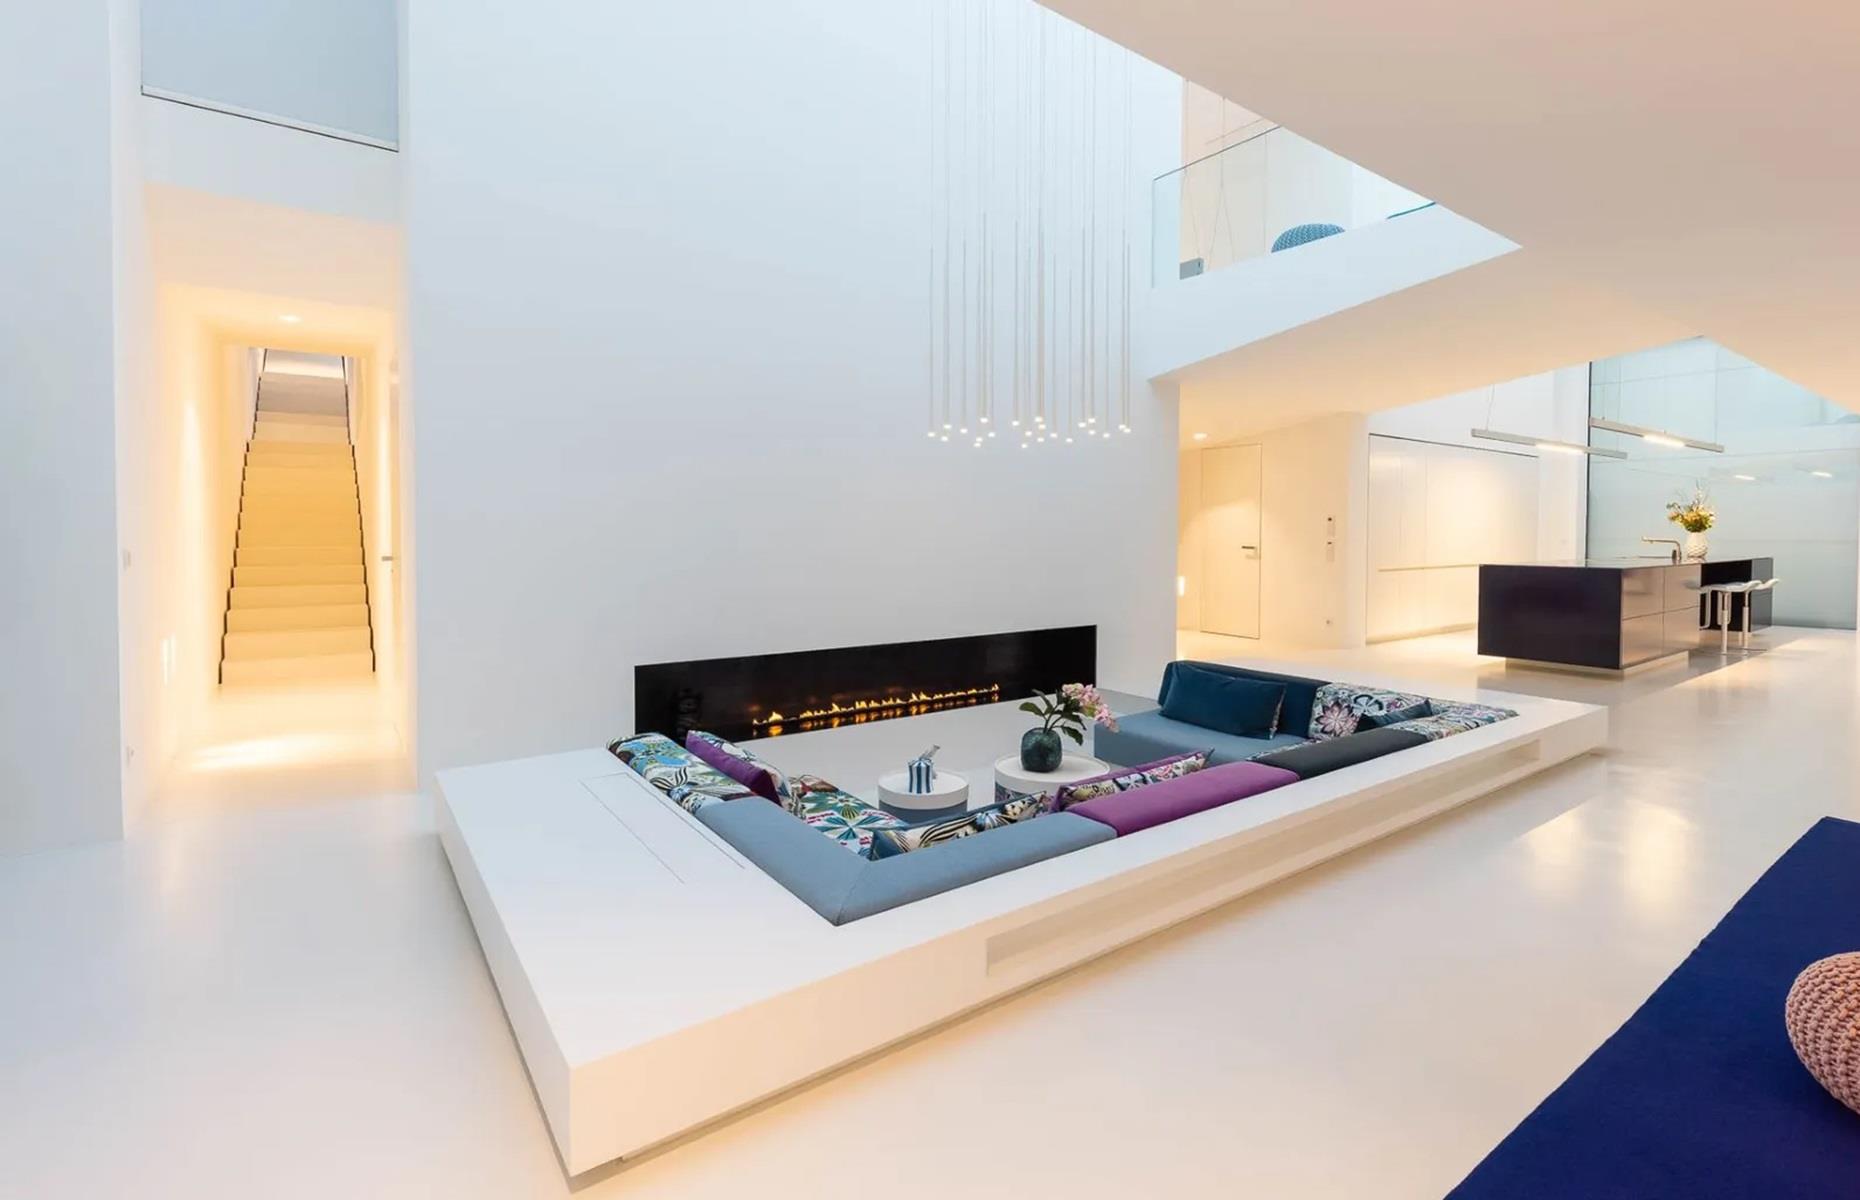 <p>Inside, the property benefits from a sleek, all-white palette and an open floorplan with a sunken lounge, dining area and kitchen. The kitchen has a glazed ceiling, allowing the cook to take in the sky while they work their magic. Upstairs, a glass bridge connects the study with the library, home theatre and three bedrooms.  </p>